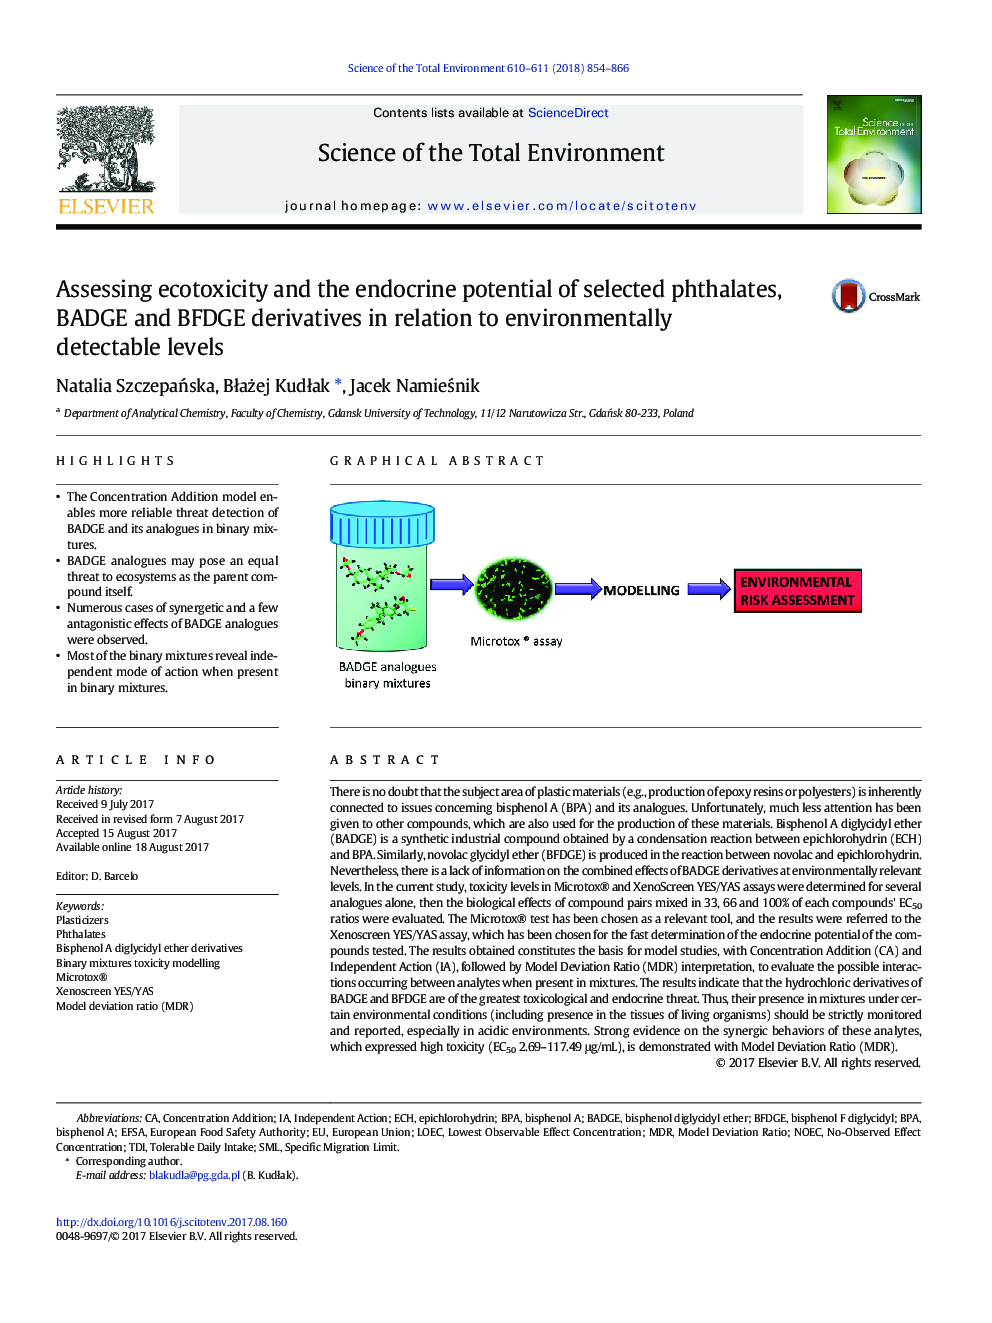 Assessing ecotoxicity and the endocrine potential of selected phthalates, BADGE and BFDGE derivatives in relation to environmentally detectable levels